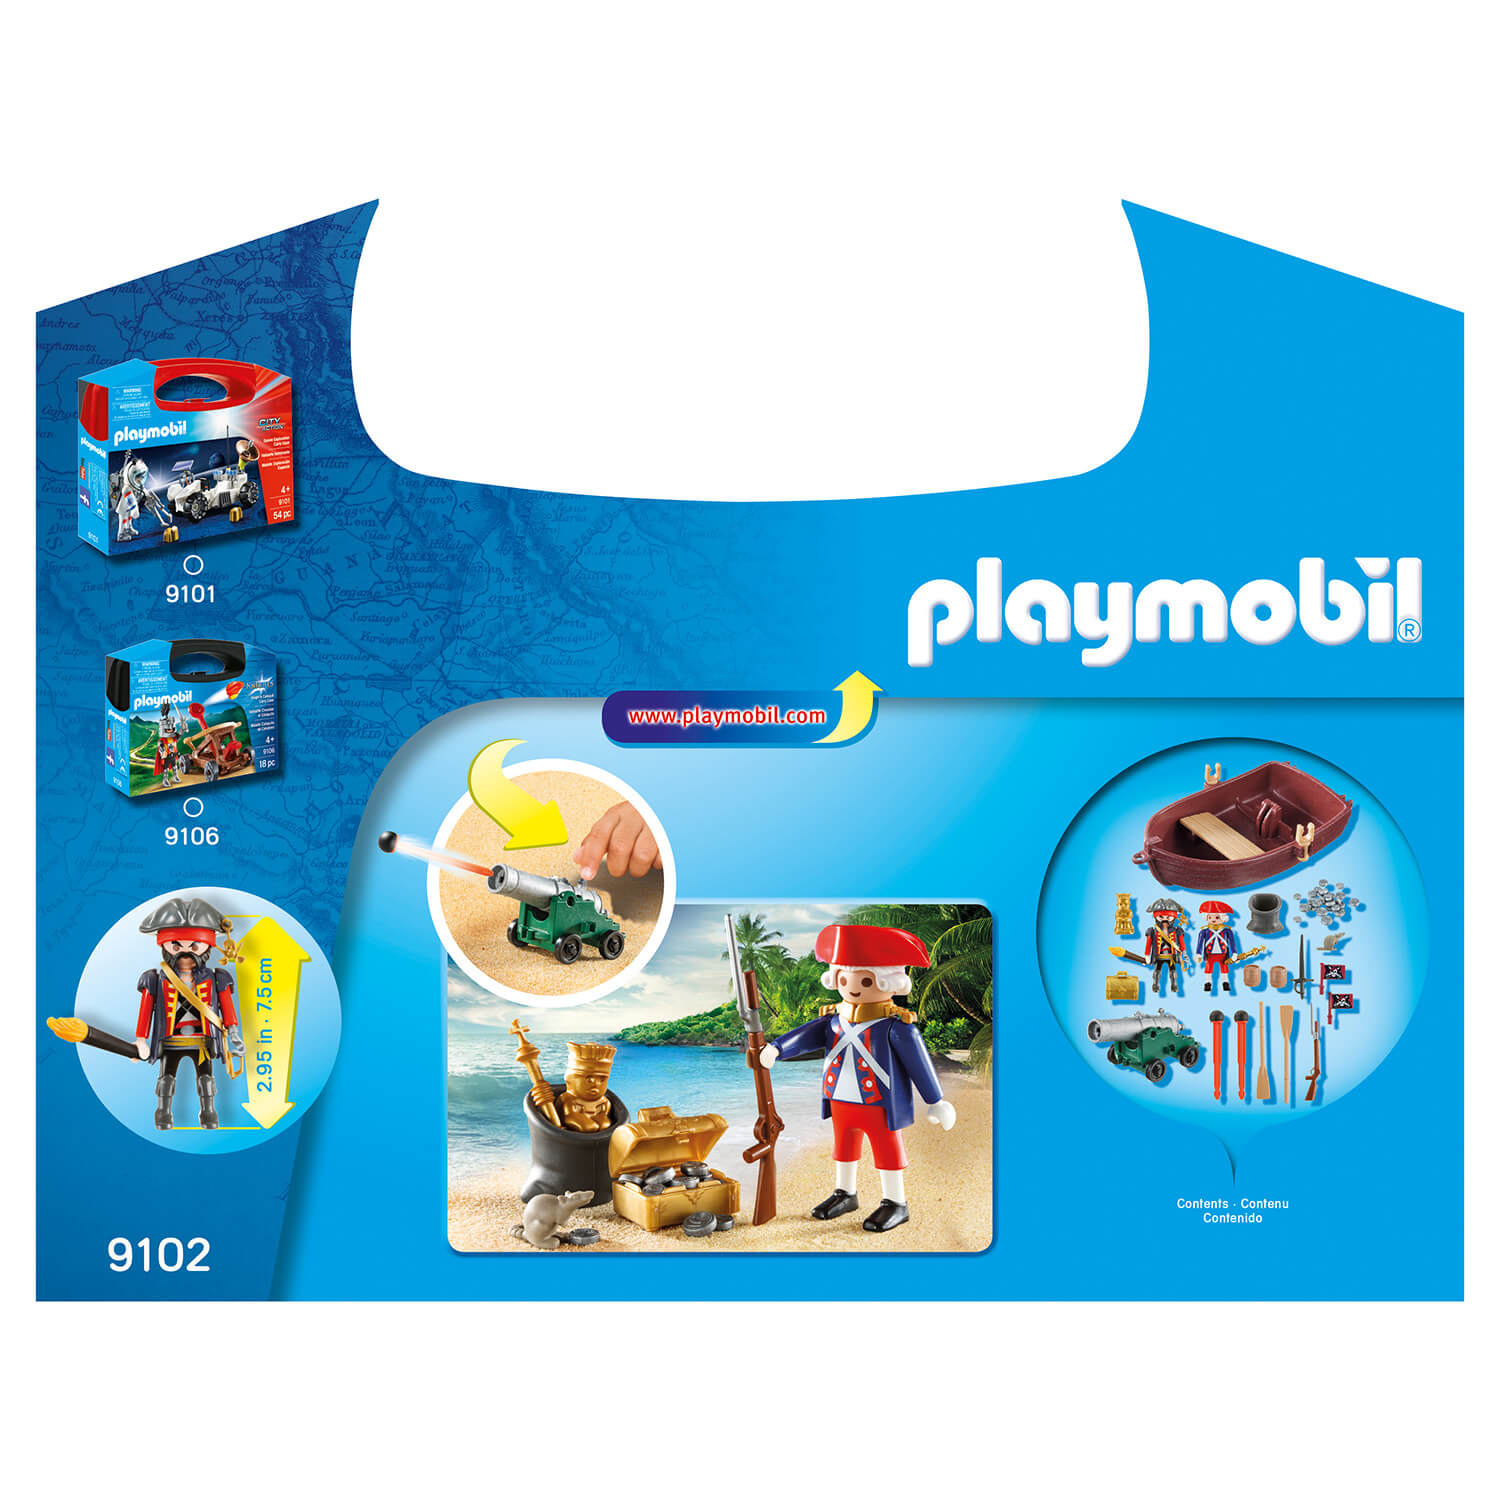 PLAYMOBIL Carry Case Pirate Raider Carry Case (9102)